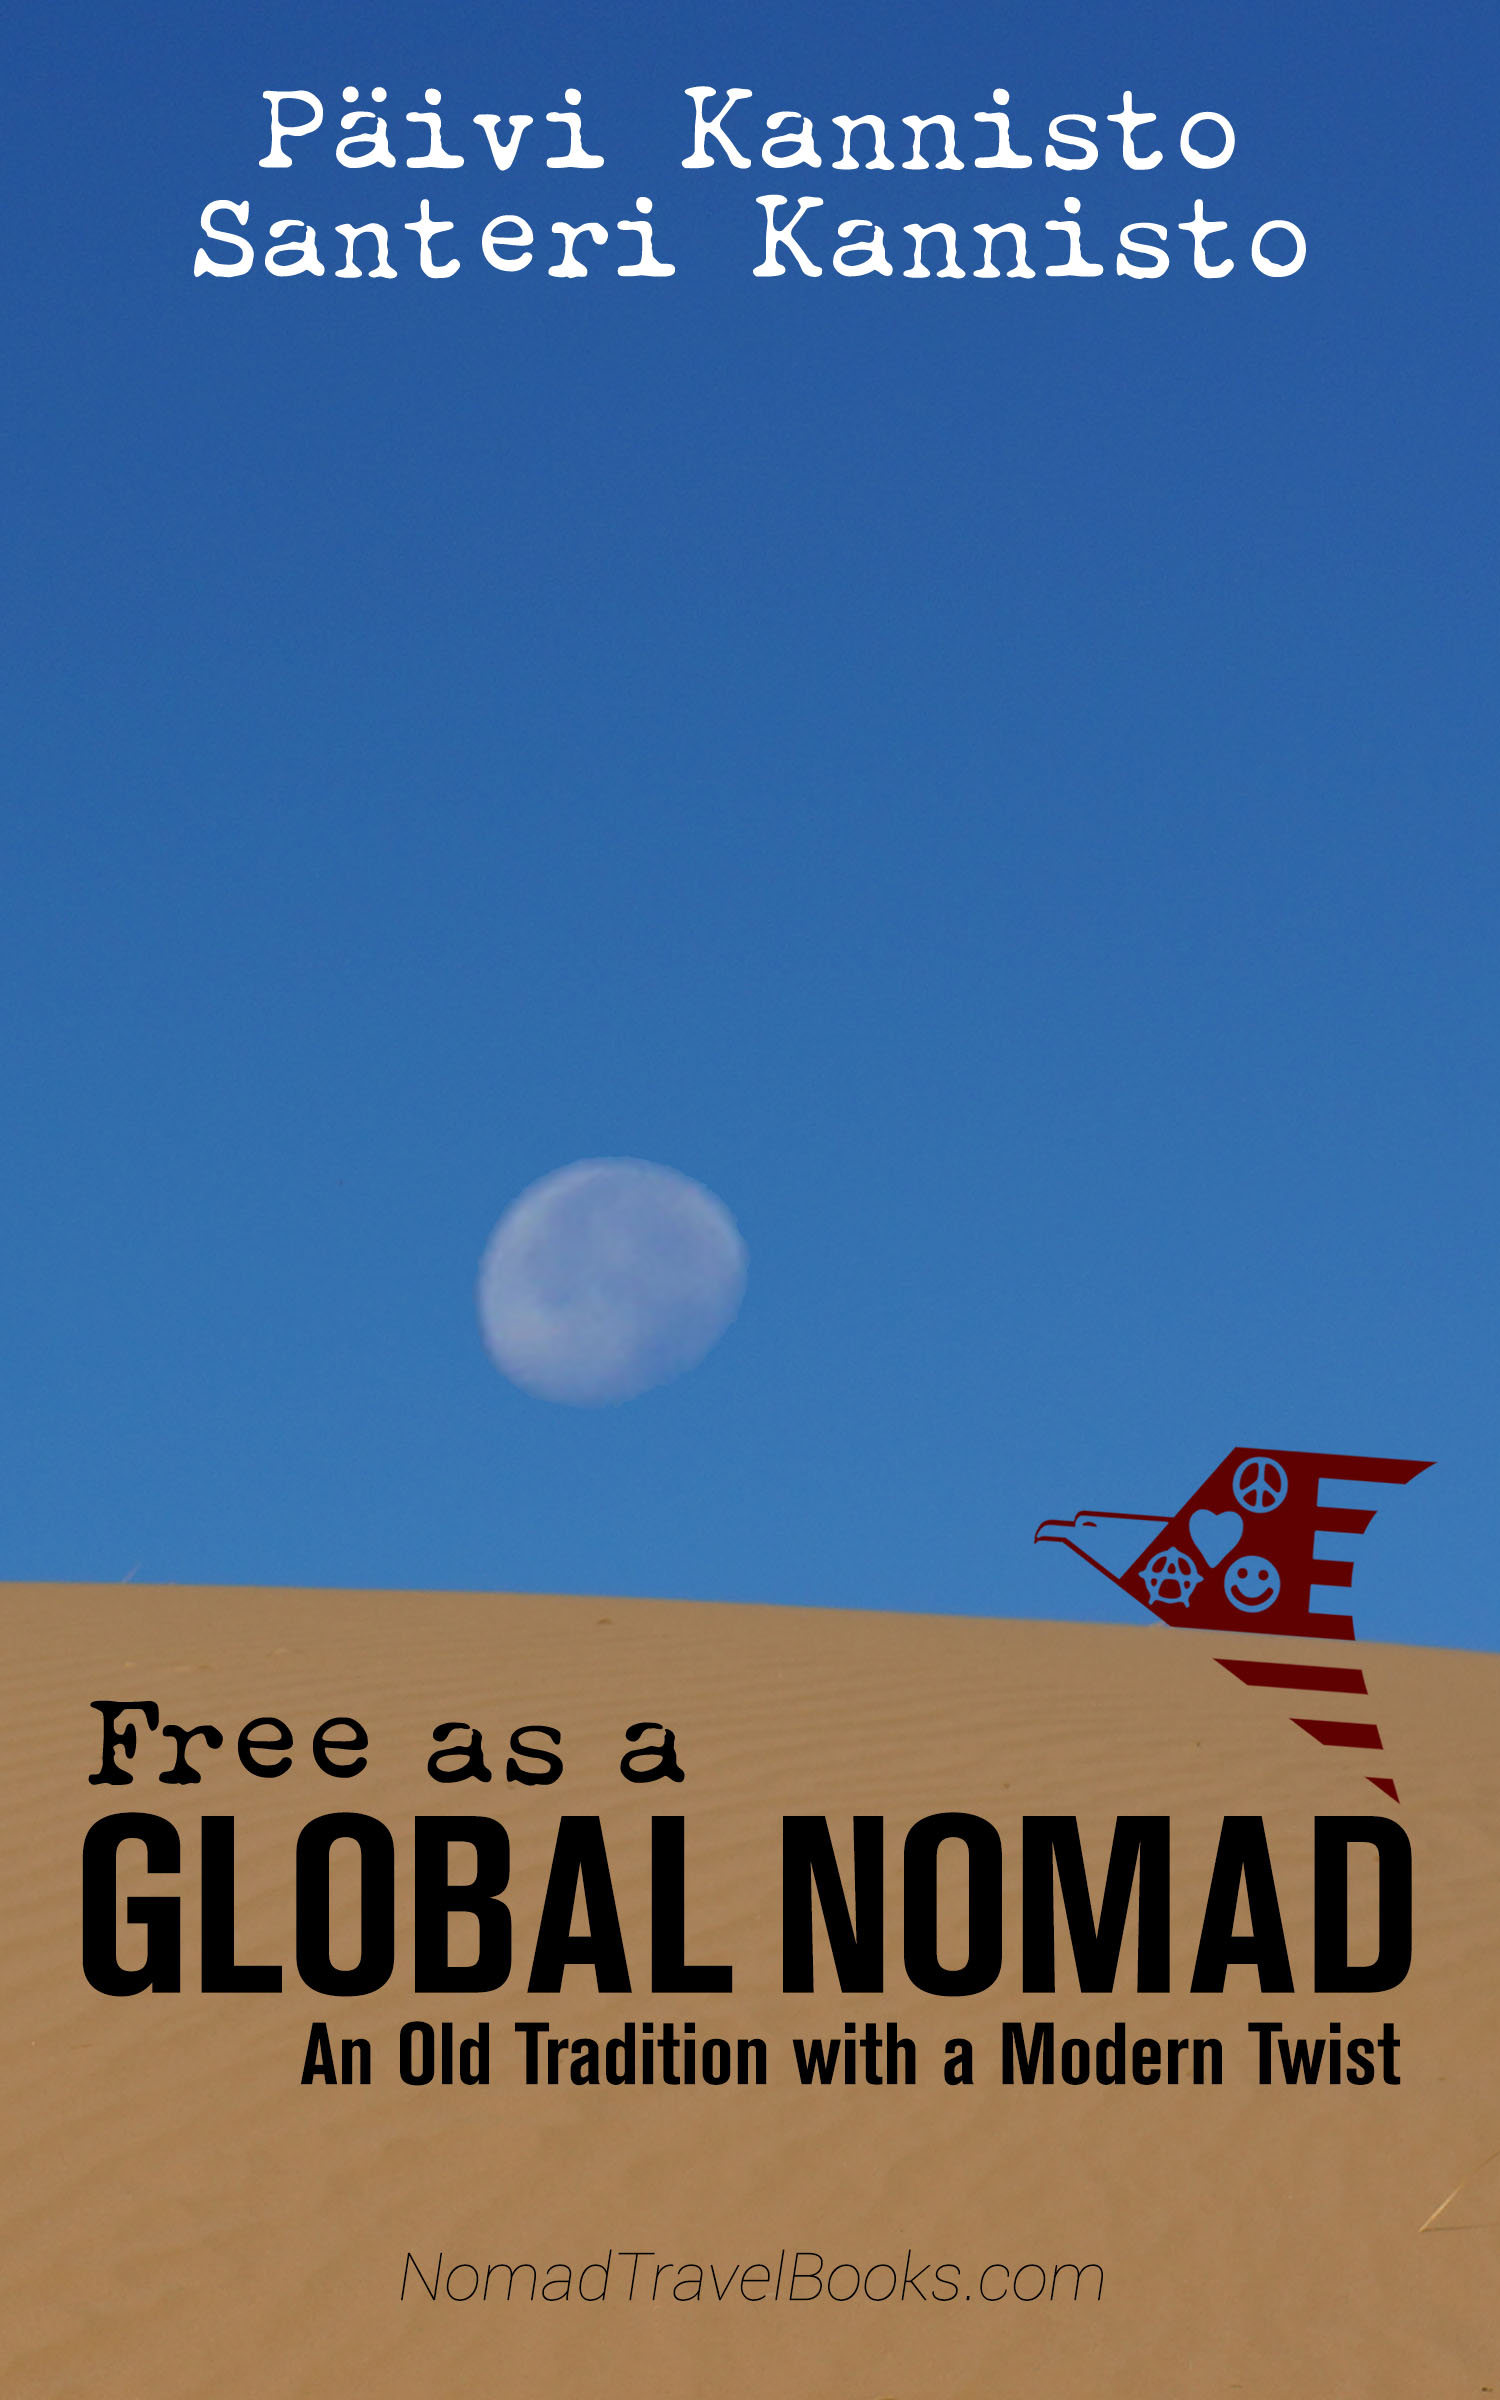 Free as a Global Nomad: An Old Tradition with a Modern Twist ISBN 978-952-7571-17-0 (HTML) book cover image